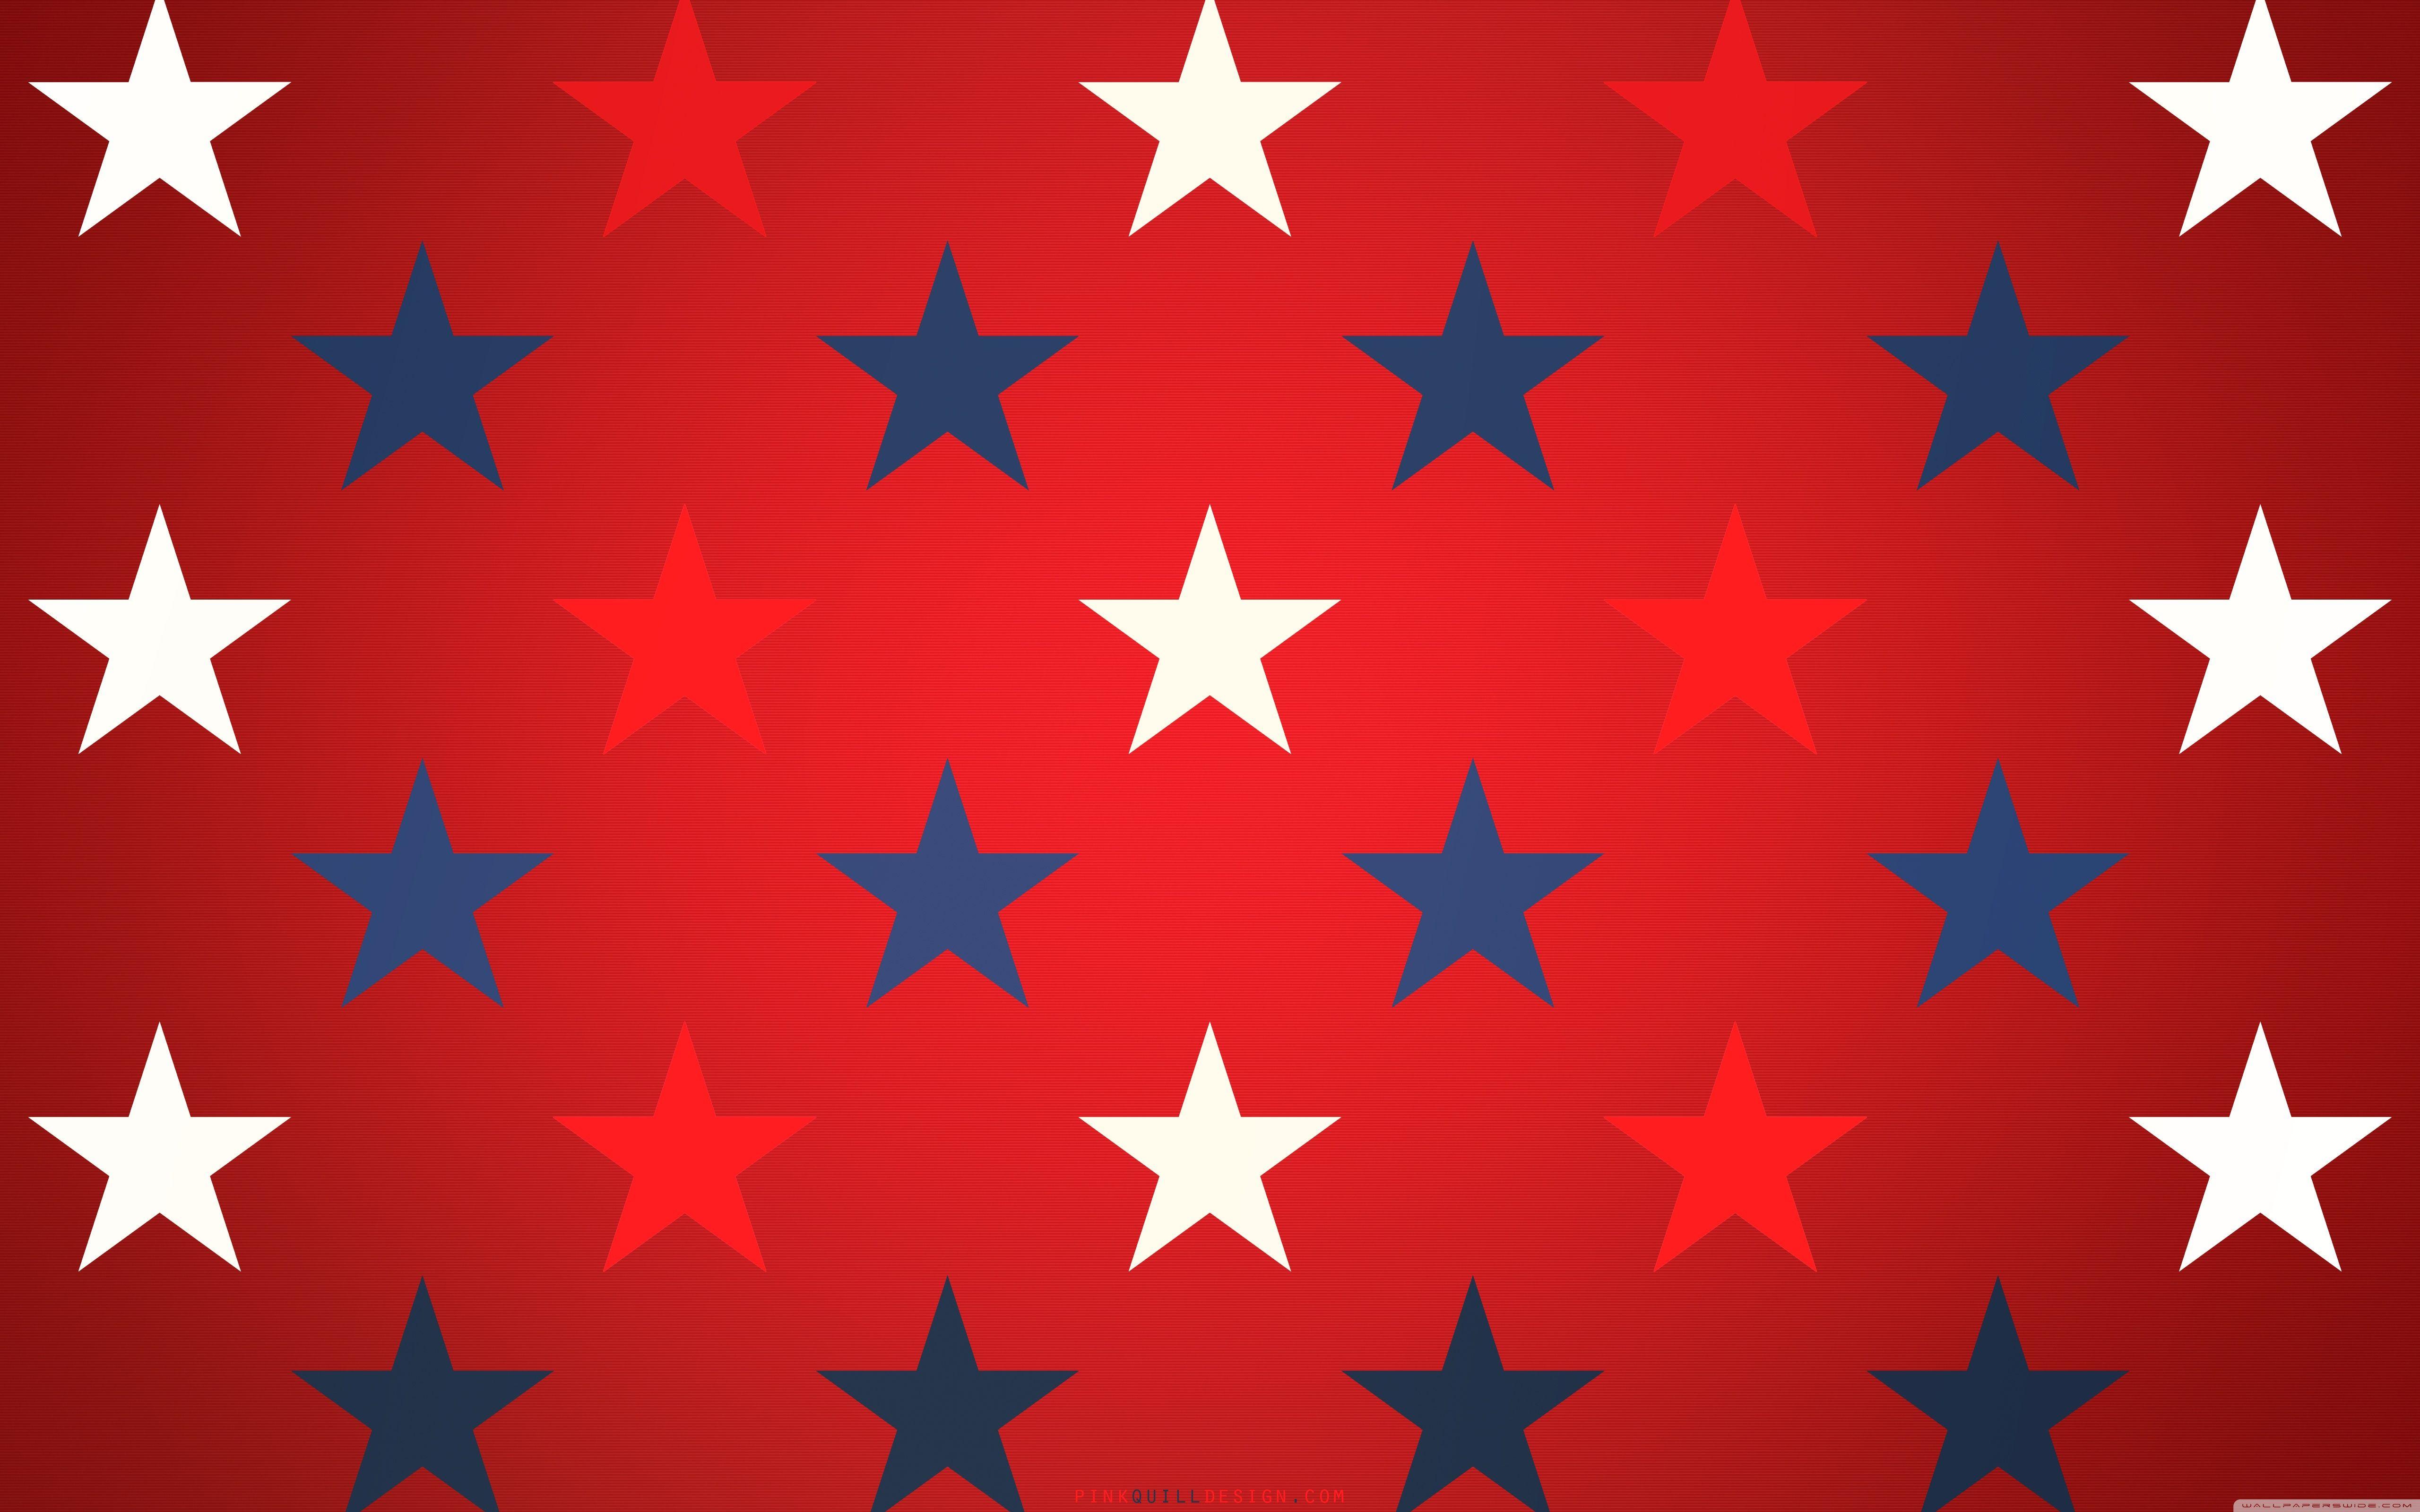 Blue, Red And White Stars HD desktop wallpapers : High Definition